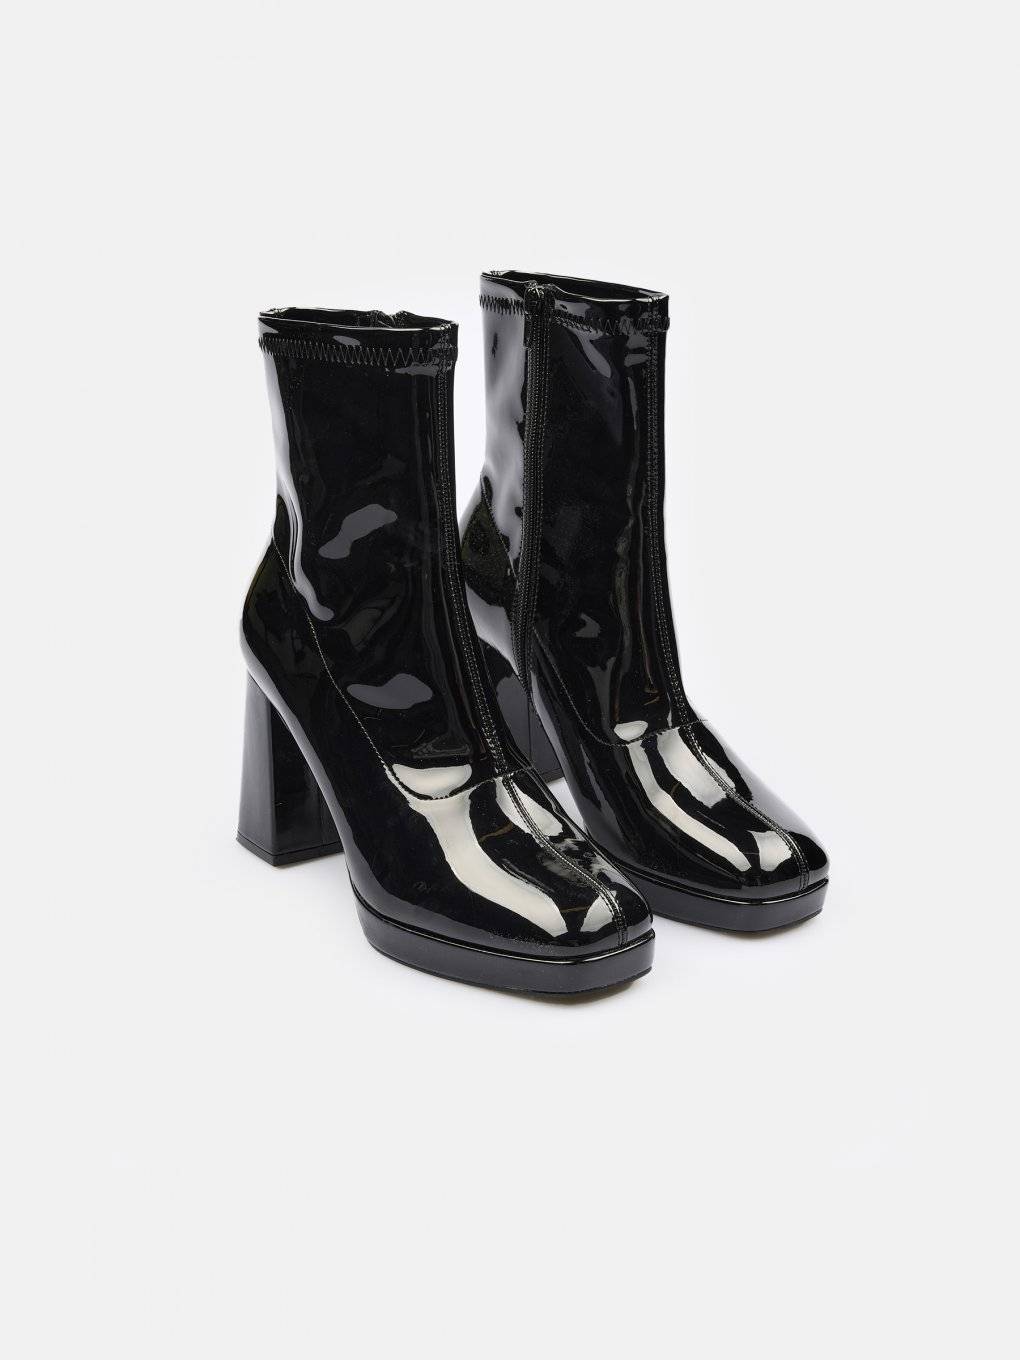 High heeled vinyl ankle boots